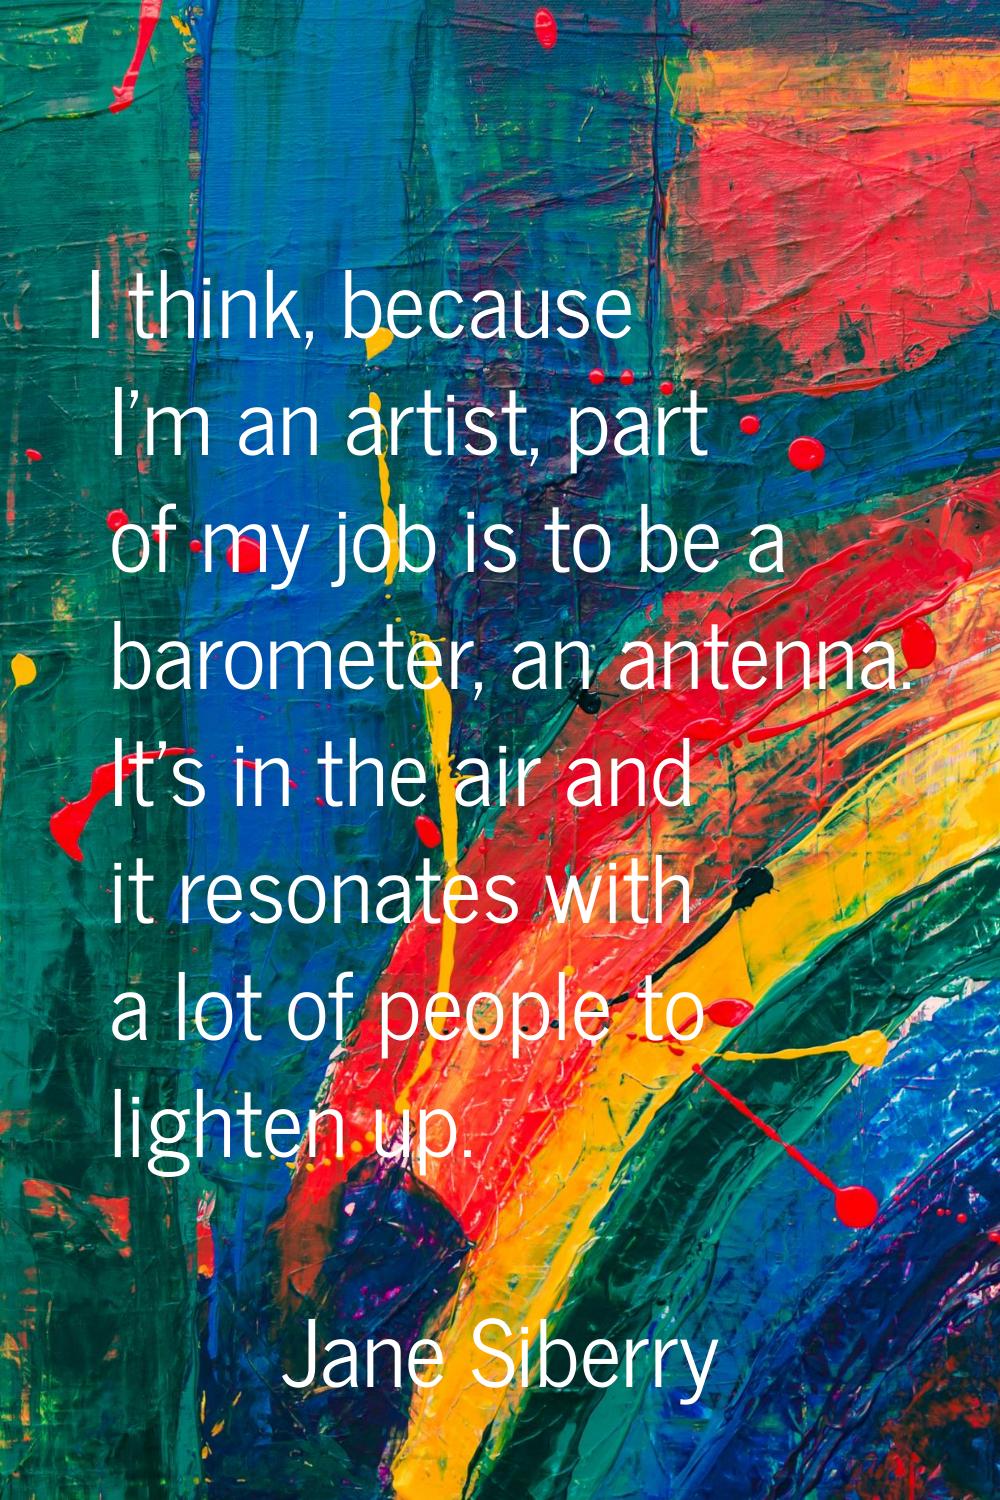 I think, because I'm an artist, part of my job is to be a barometer, an antenna. It's in the air an